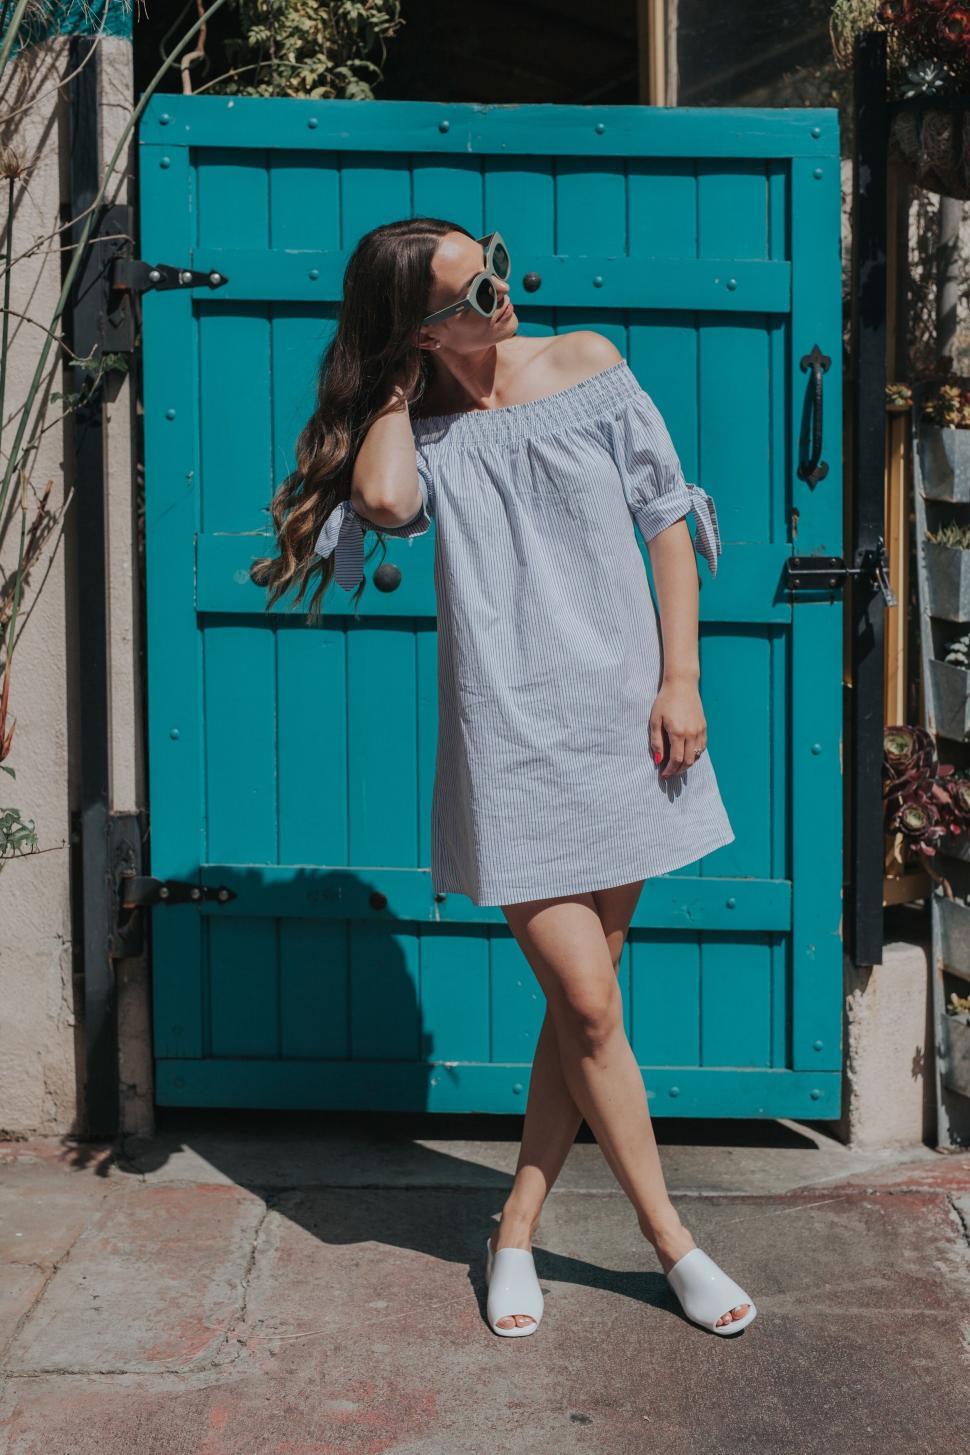 Free Image of Woman in blue dress standing by teal door 